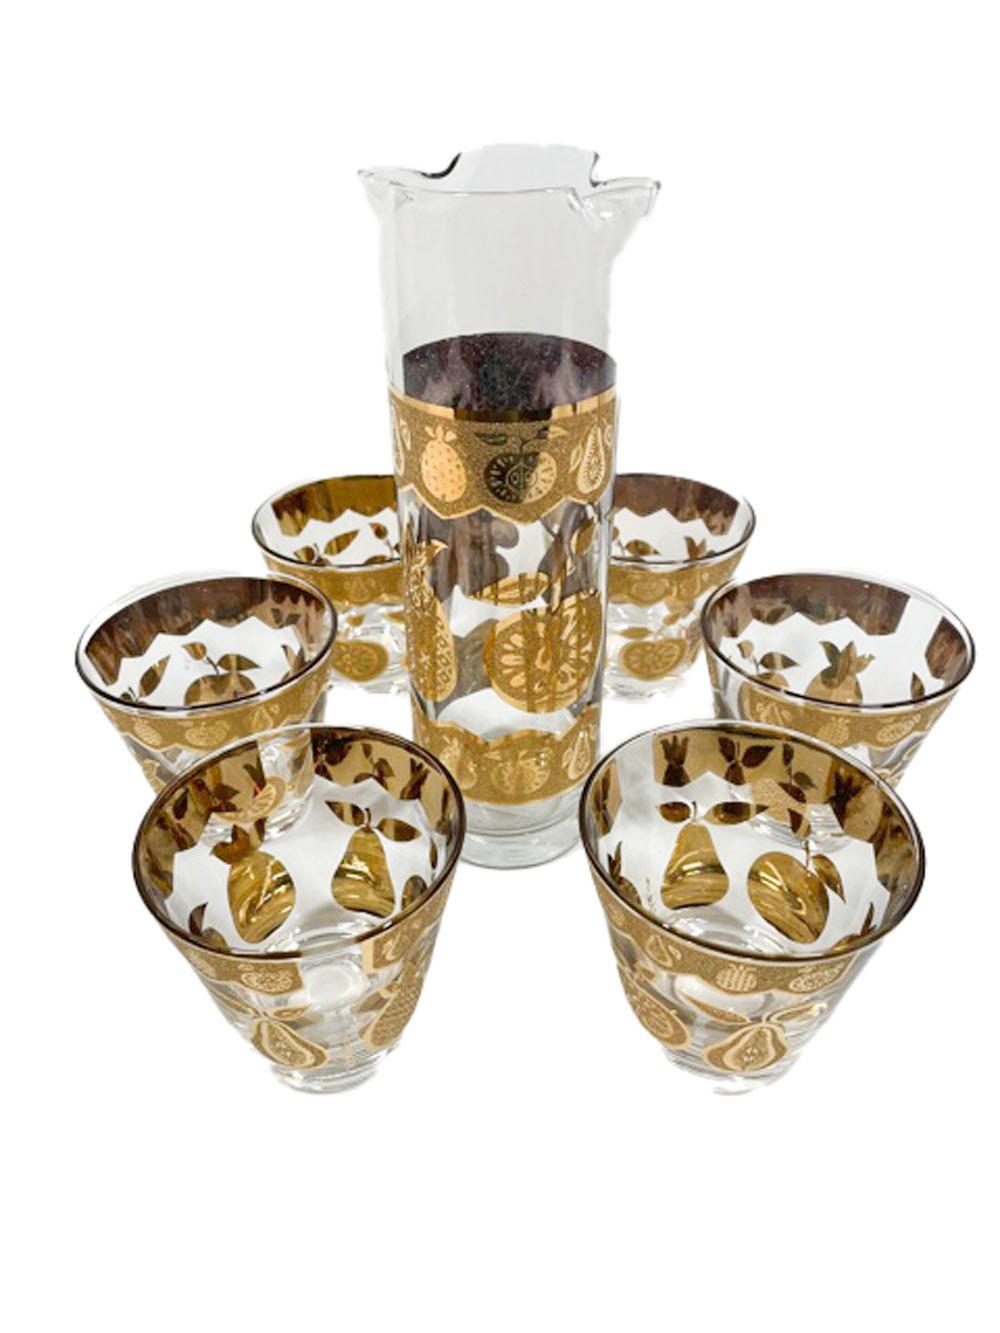 Mid-Century Modern cocktail set by Culver in the Florentine pattern, decorated in smooth and textured 22k gold depicting apple, pear, pineapple and grapes. The set consists of a cocktail pitcher and six old fashioned glasses.